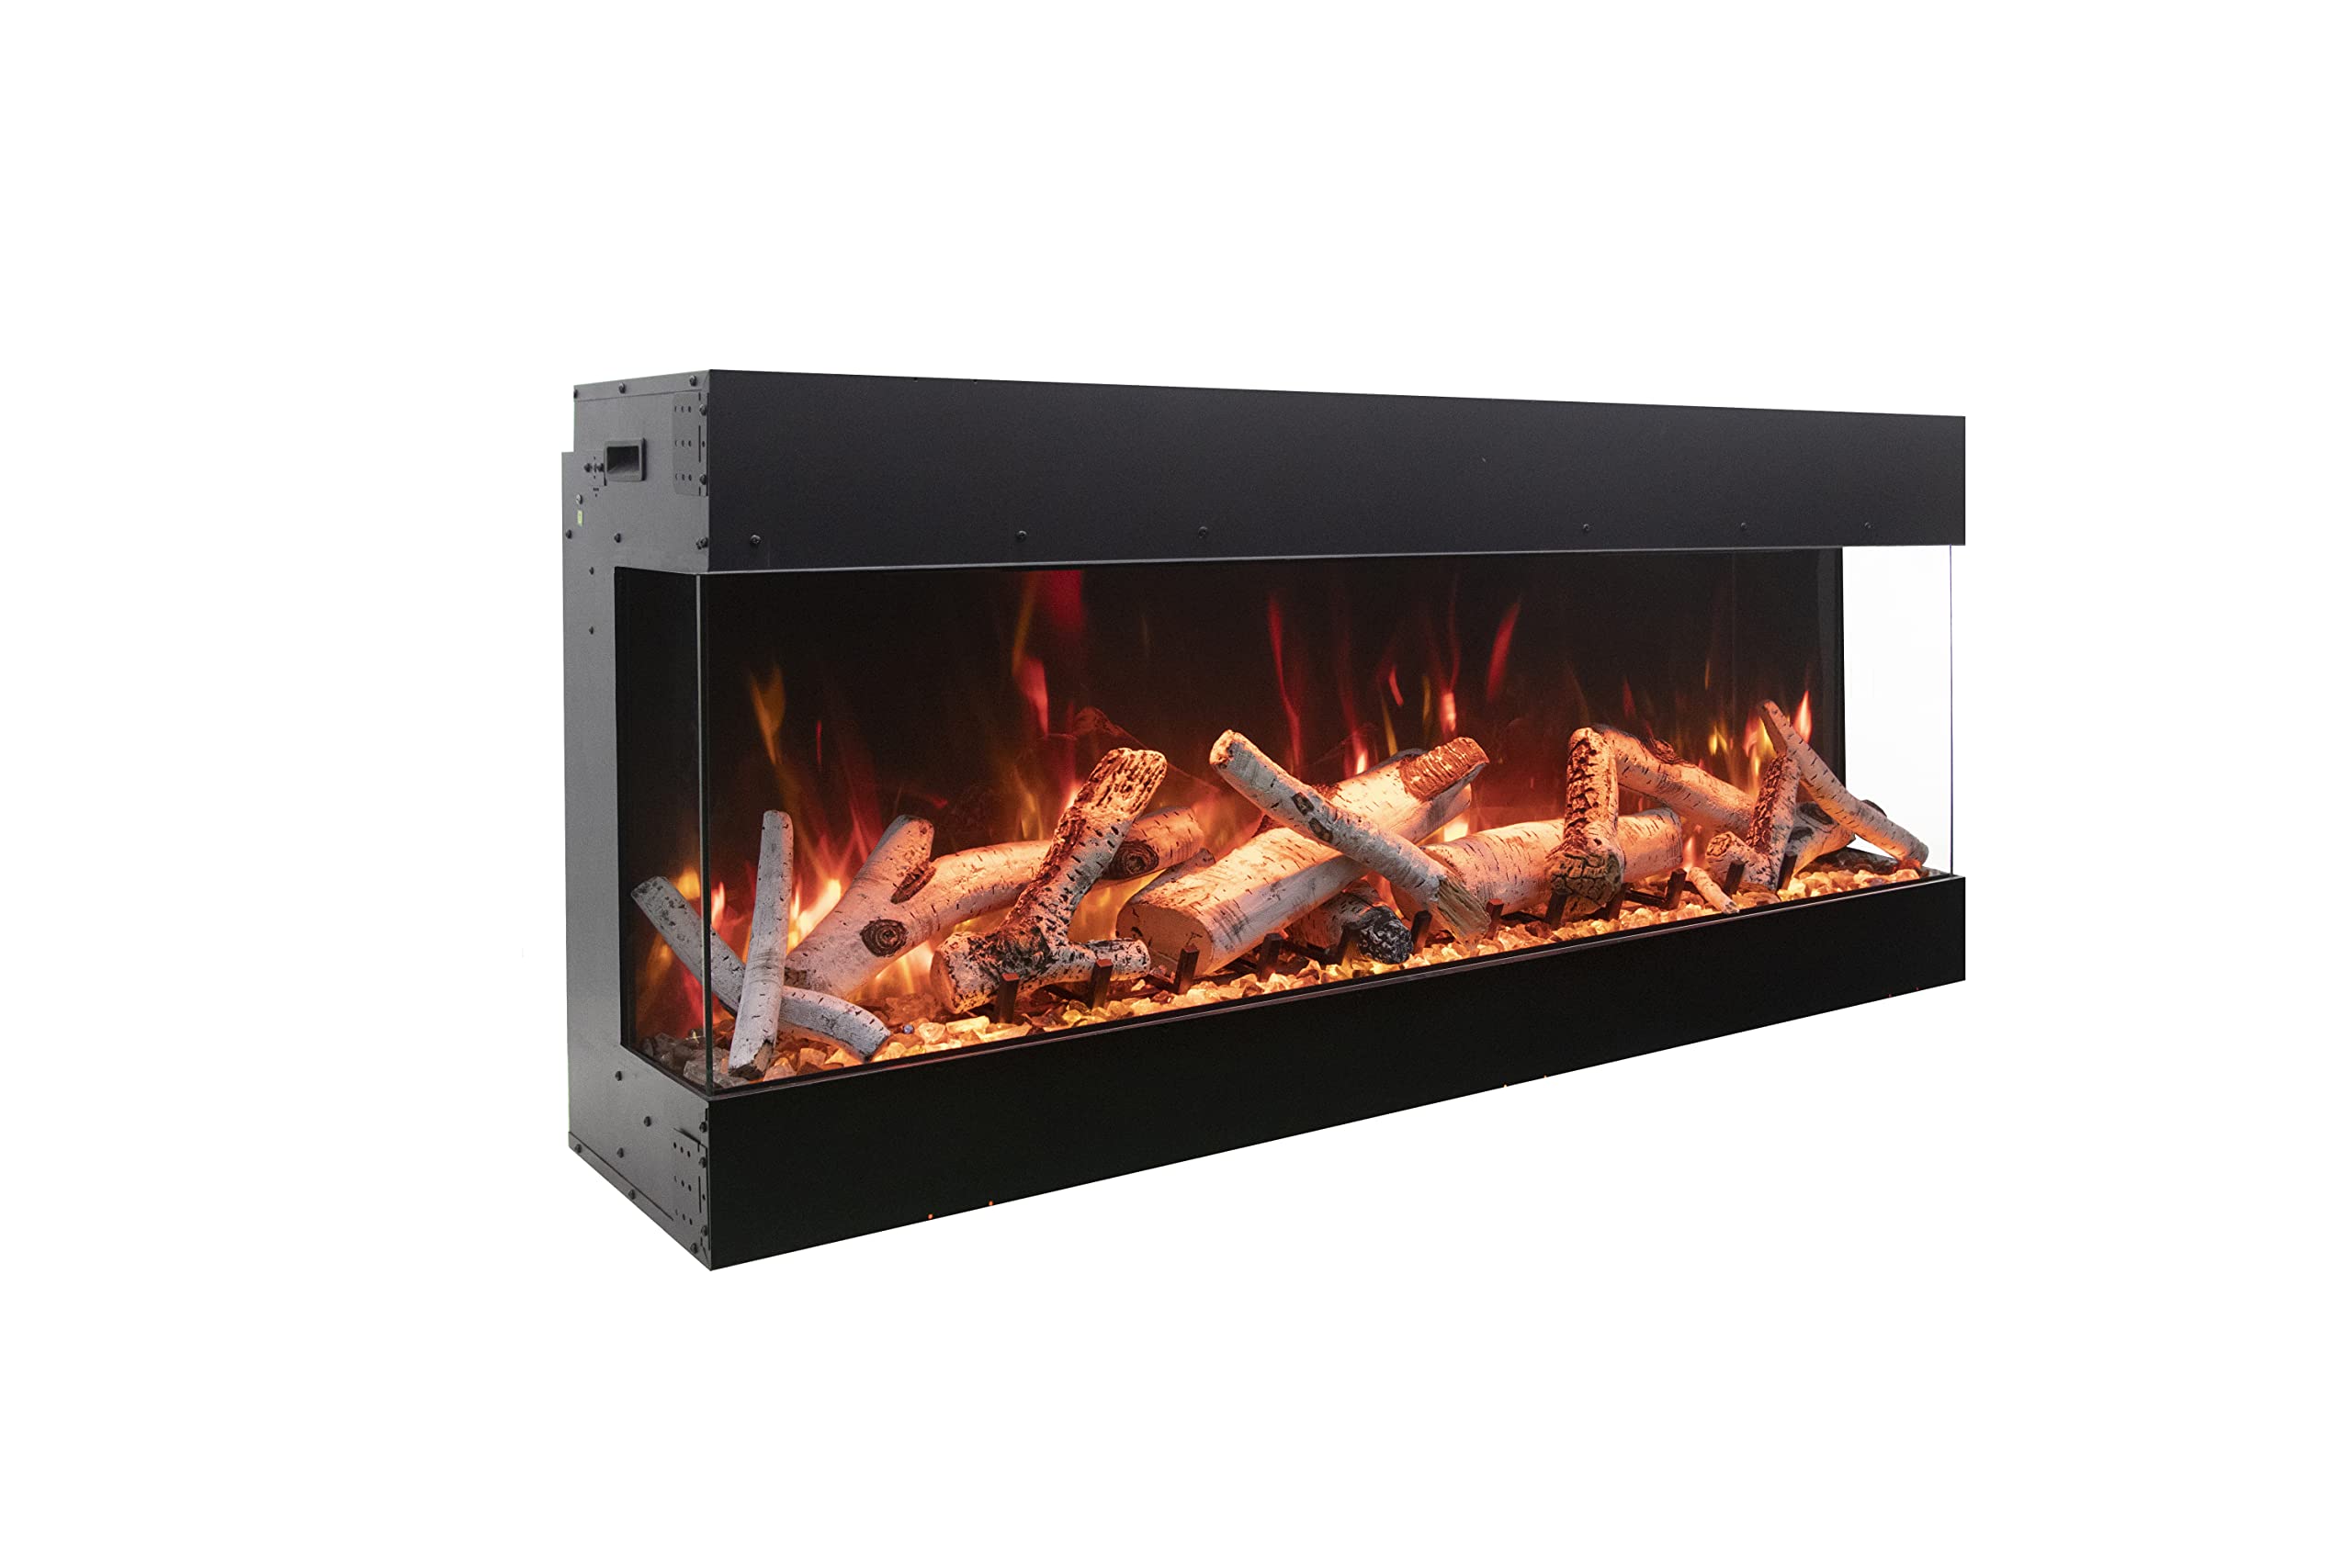 Tru View Bespoke  65? Indoor / Outdoor, WiFi Enabled, Bluetooth Capable 3 Sided Fireplace  Featuring a Glass Viewing Height of